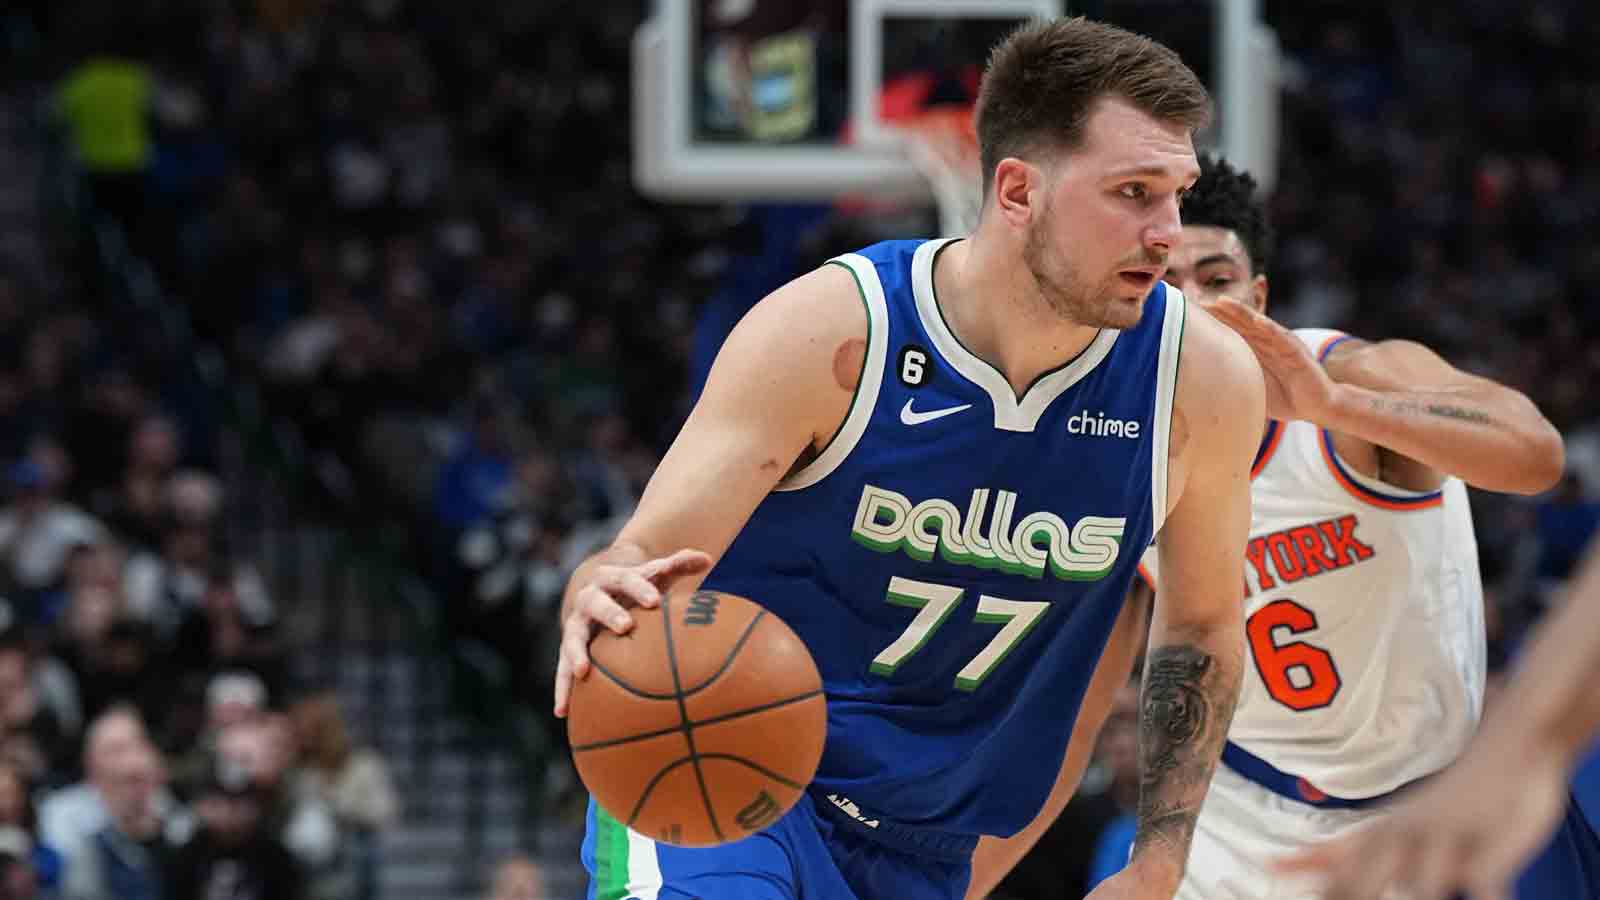 Luka Doncic's 60-21-10 stat line in Mavs' win goes viral - Chicago Sun-Times